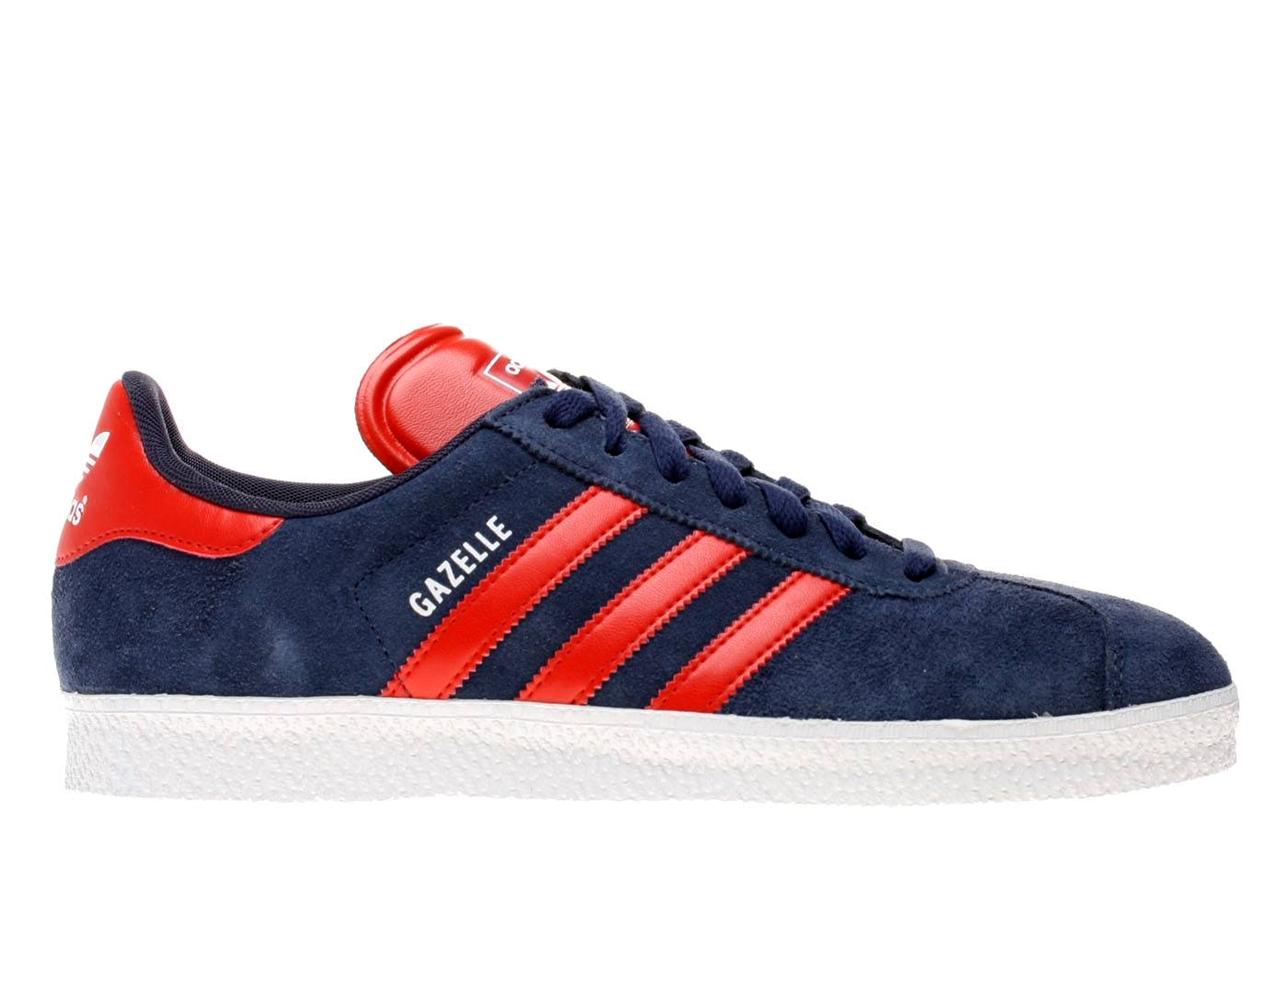 adidas gazelle blue and red